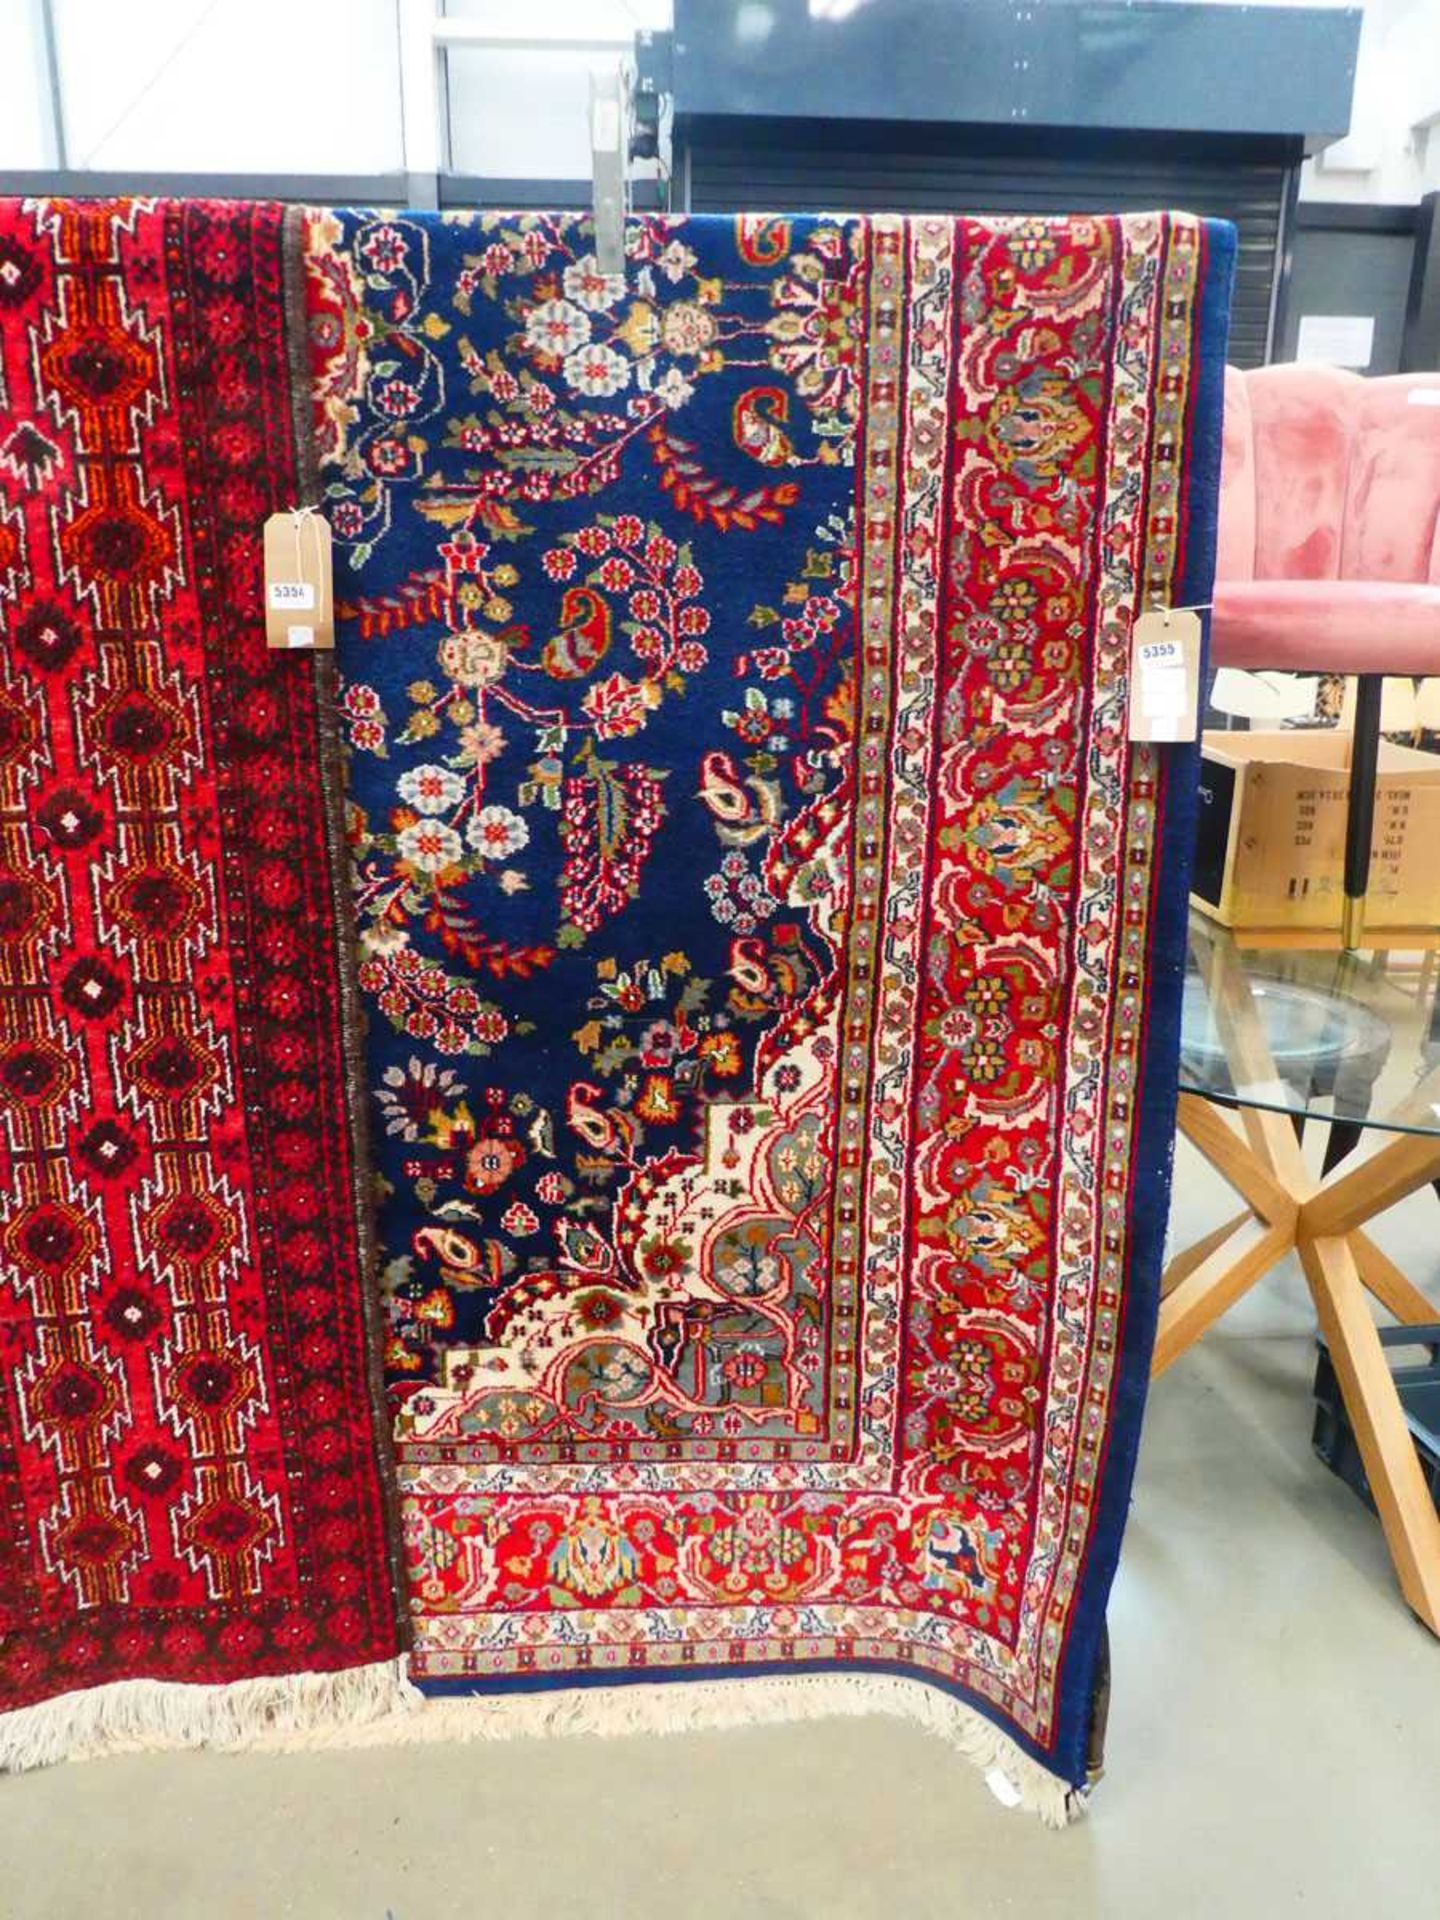 (8) Indian woollen carpet with floral pattern and navy blue border